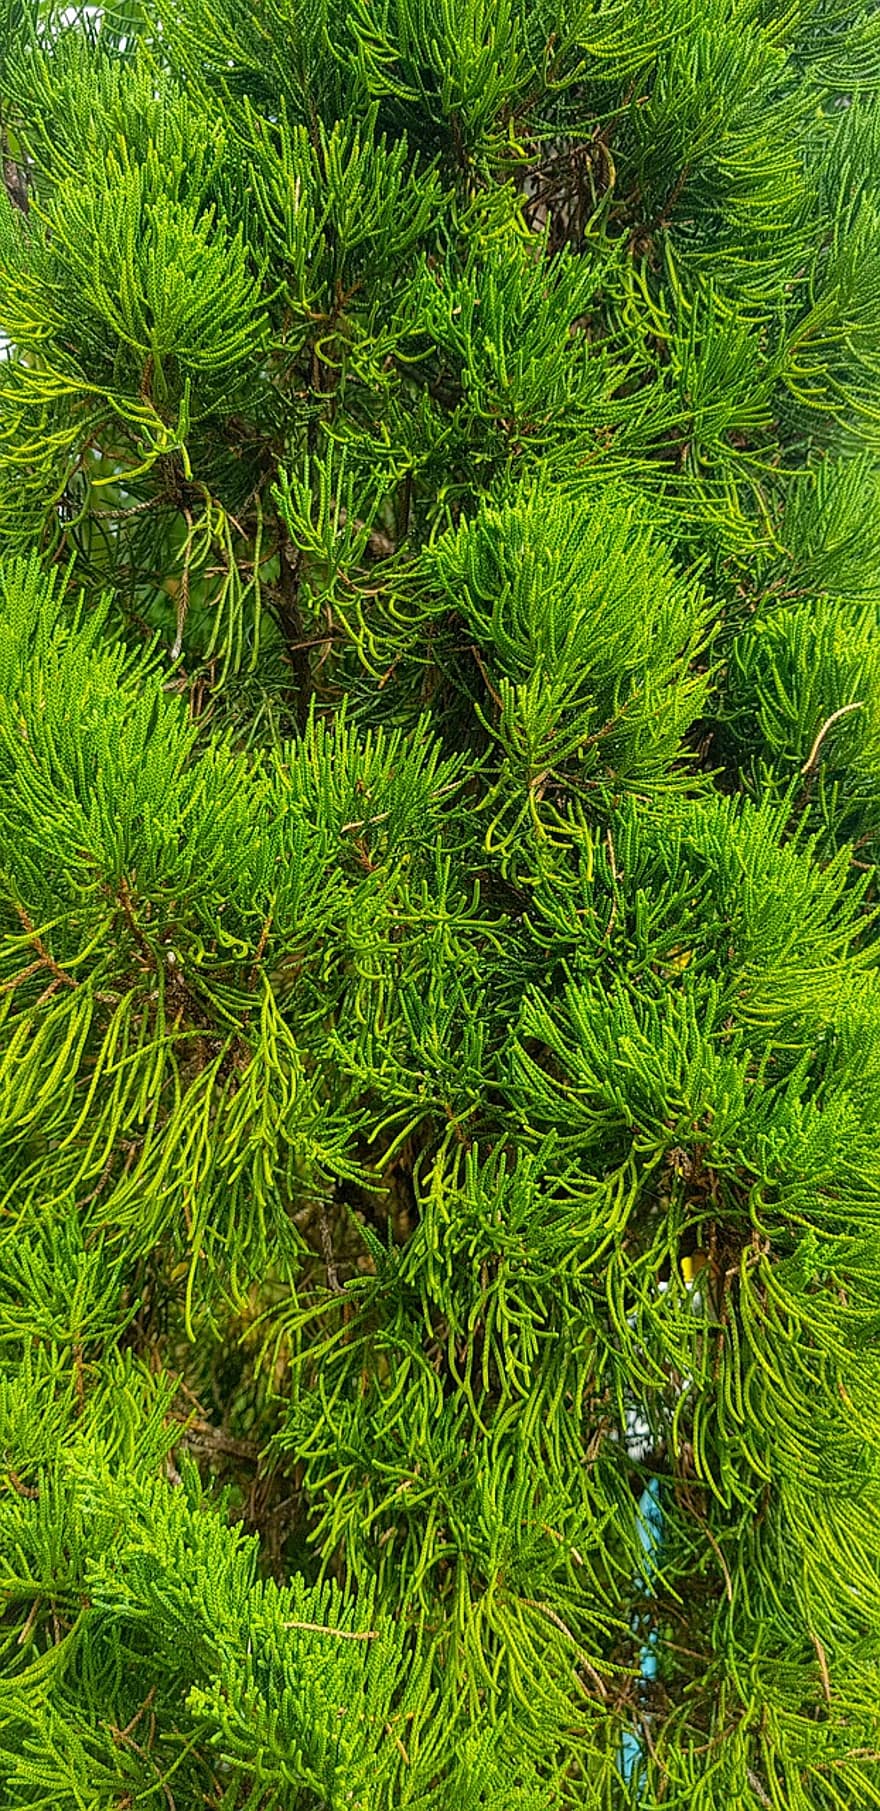 Pine Tree, Nature, Forest, Tree, Woods, Wilderness, plant, green color, close-up, backgrounds, leaf